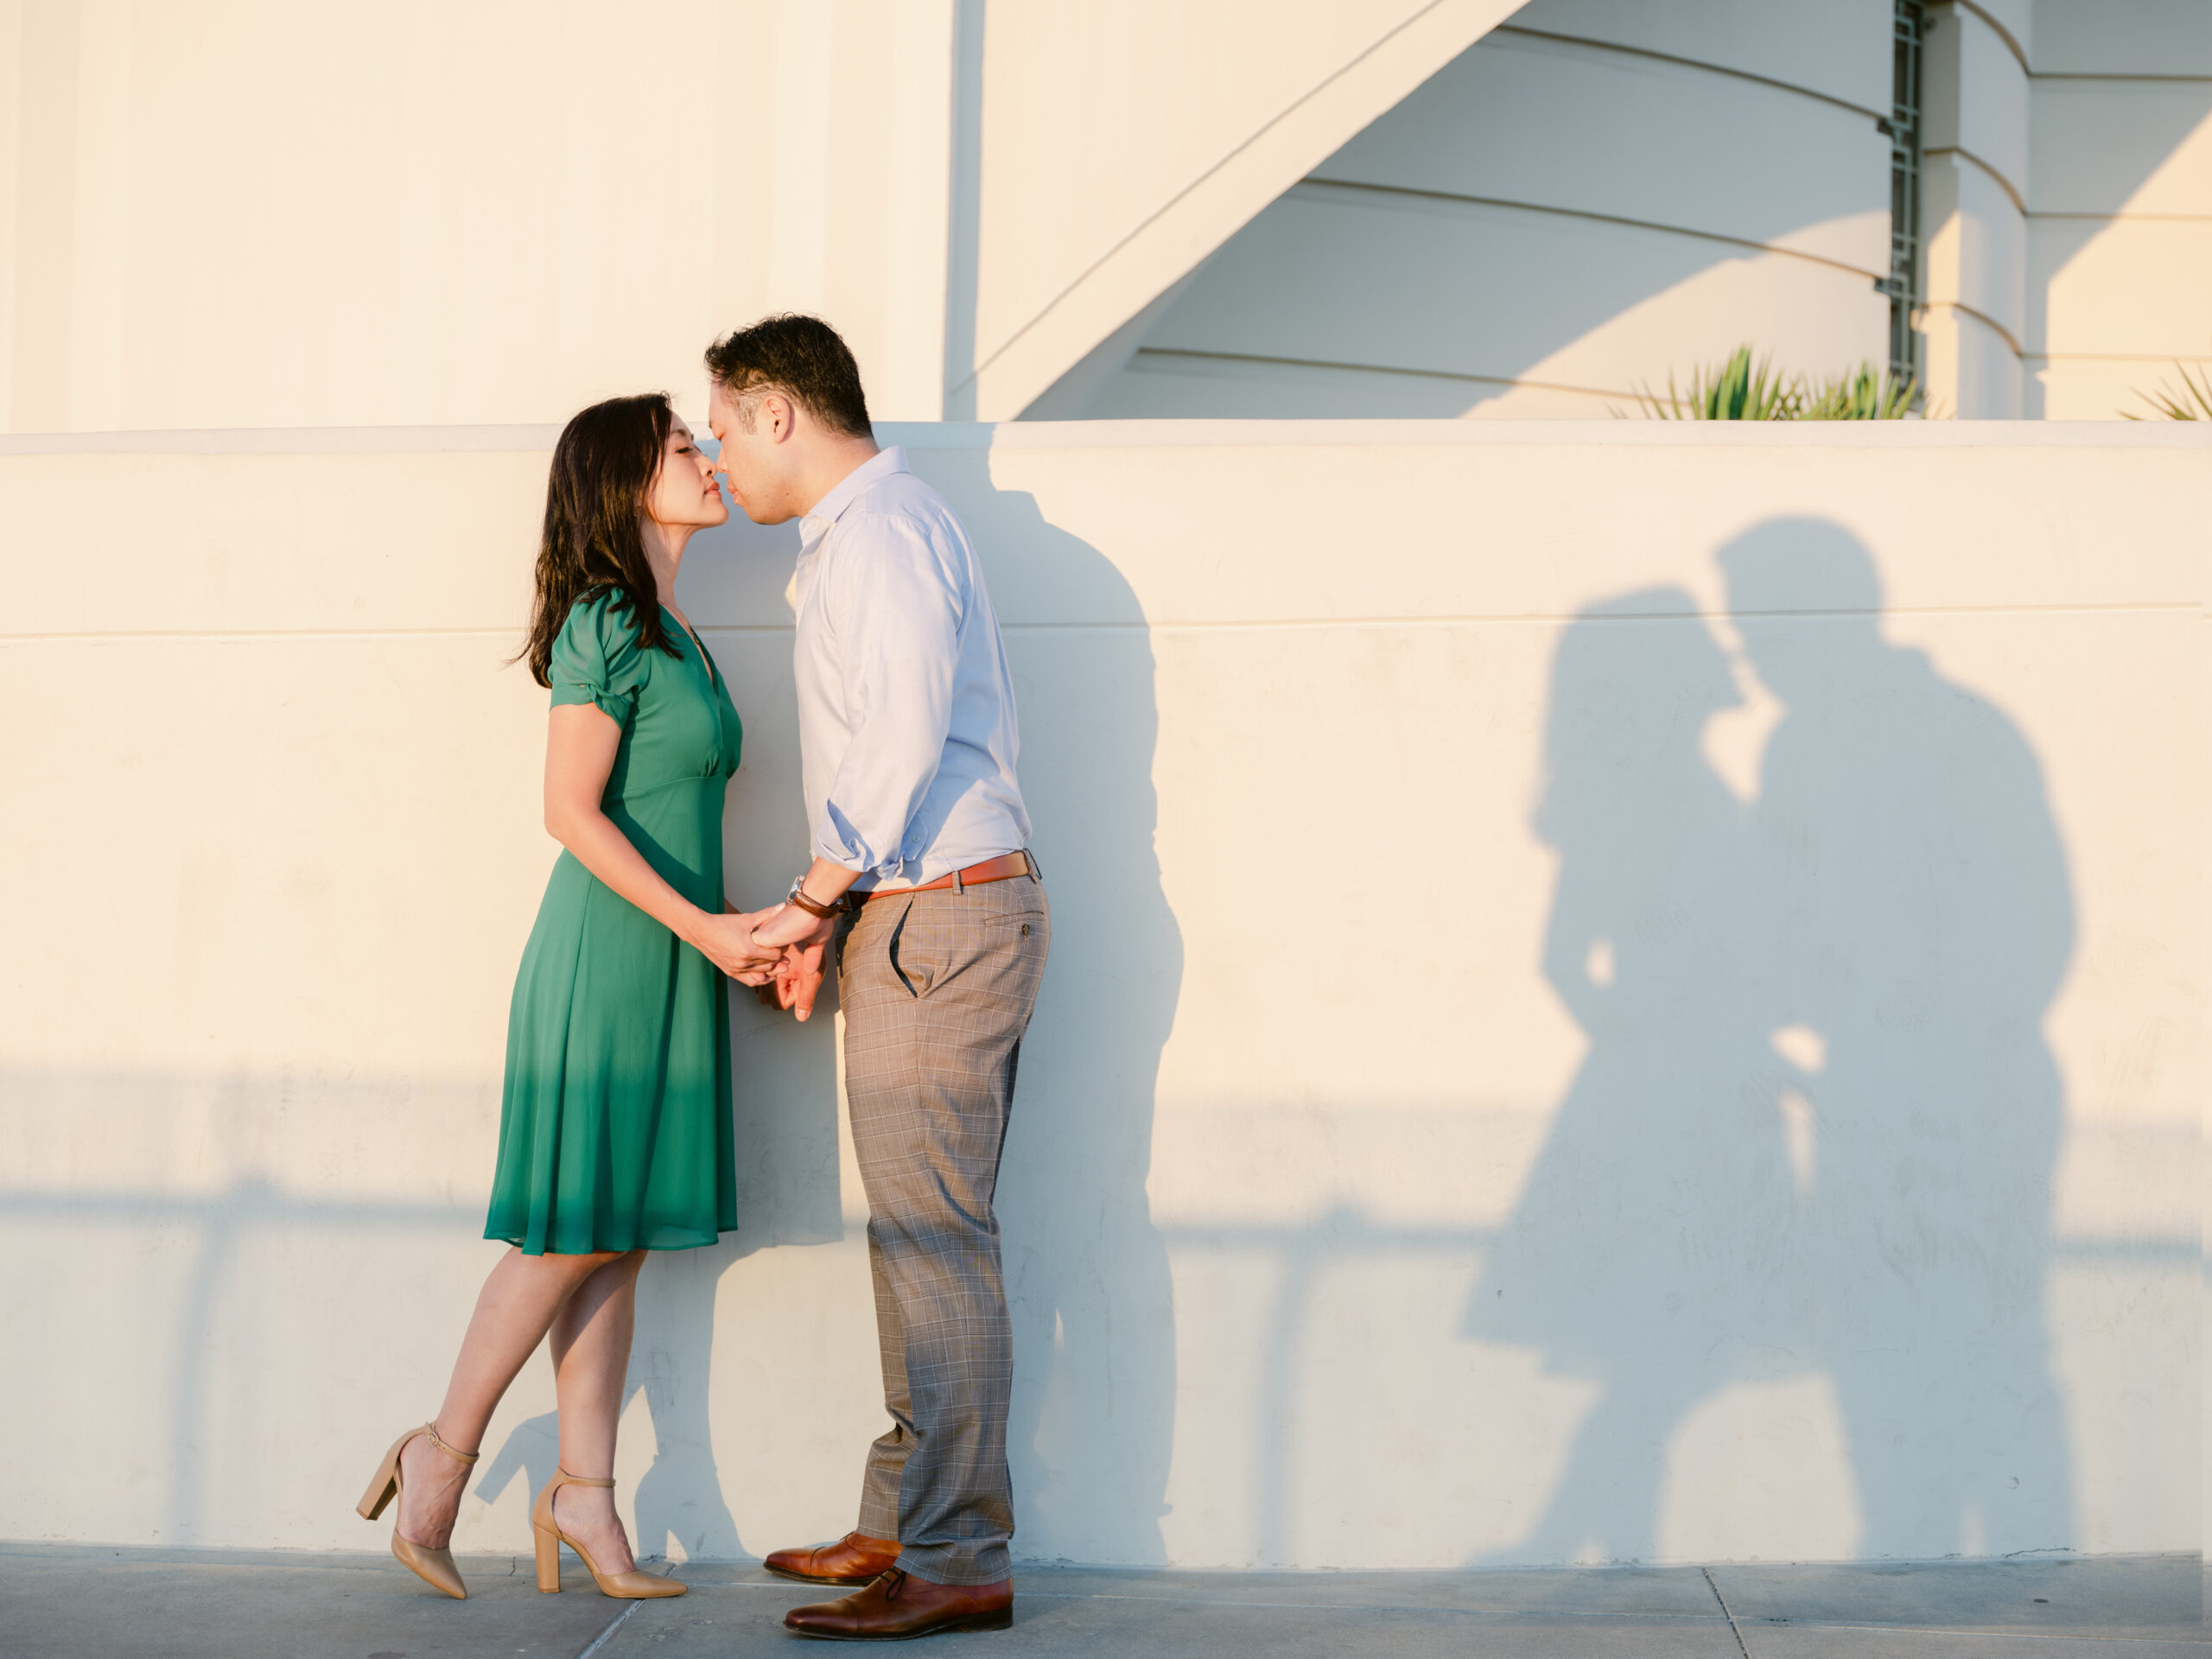 Los Angeles Proposal Photography and Video